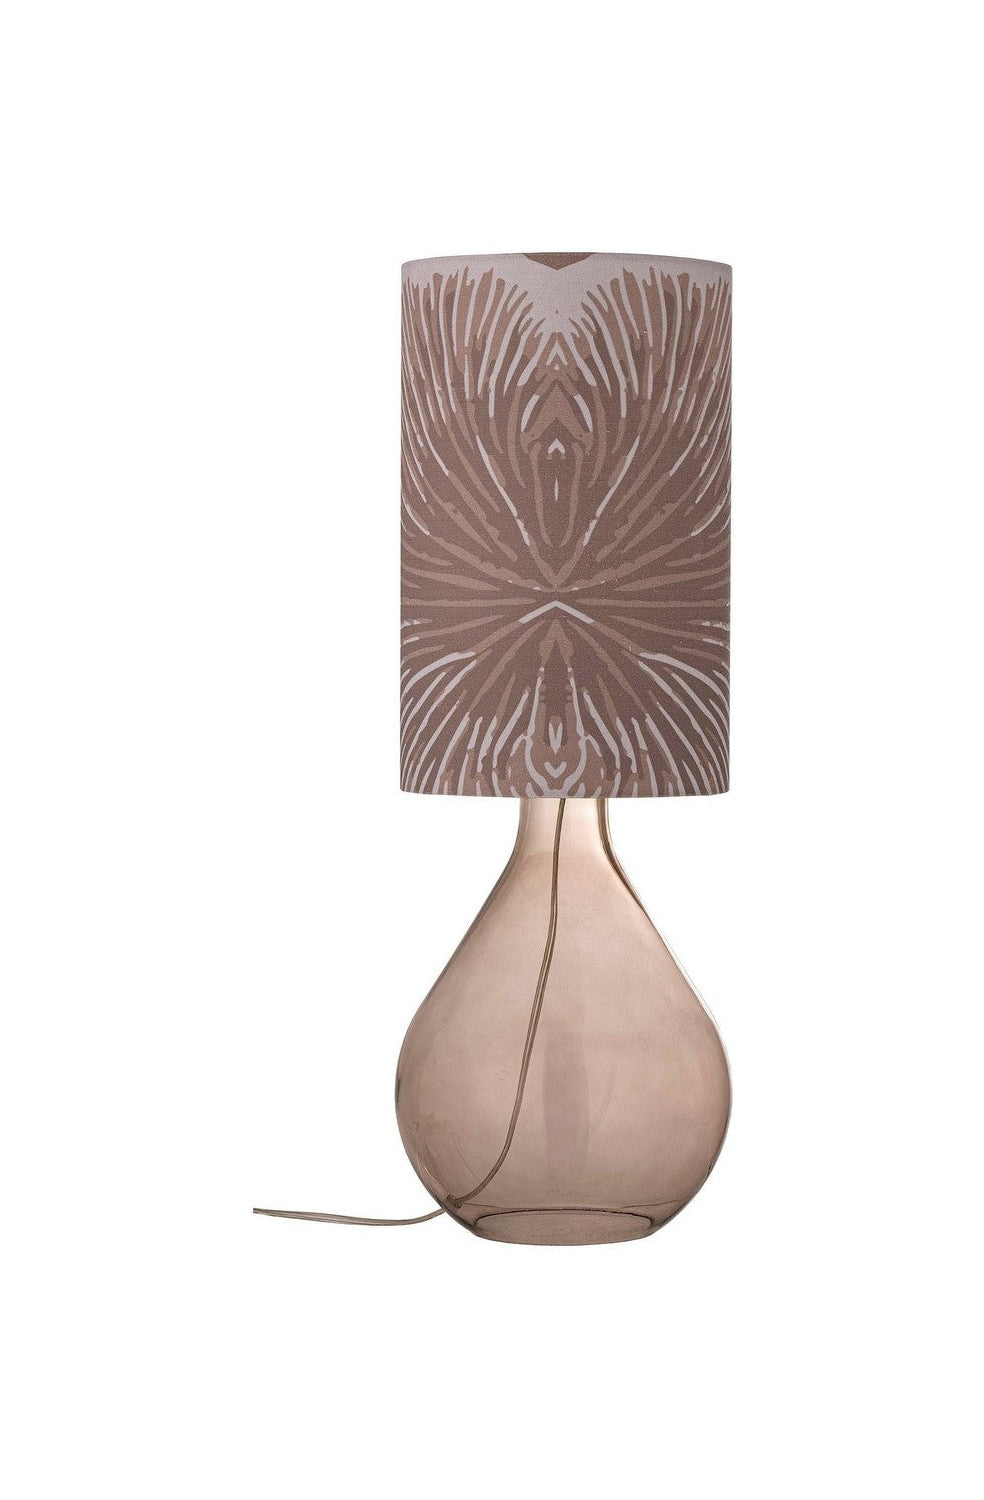 Creative Collection Leni Table lamp, Brown, Glass